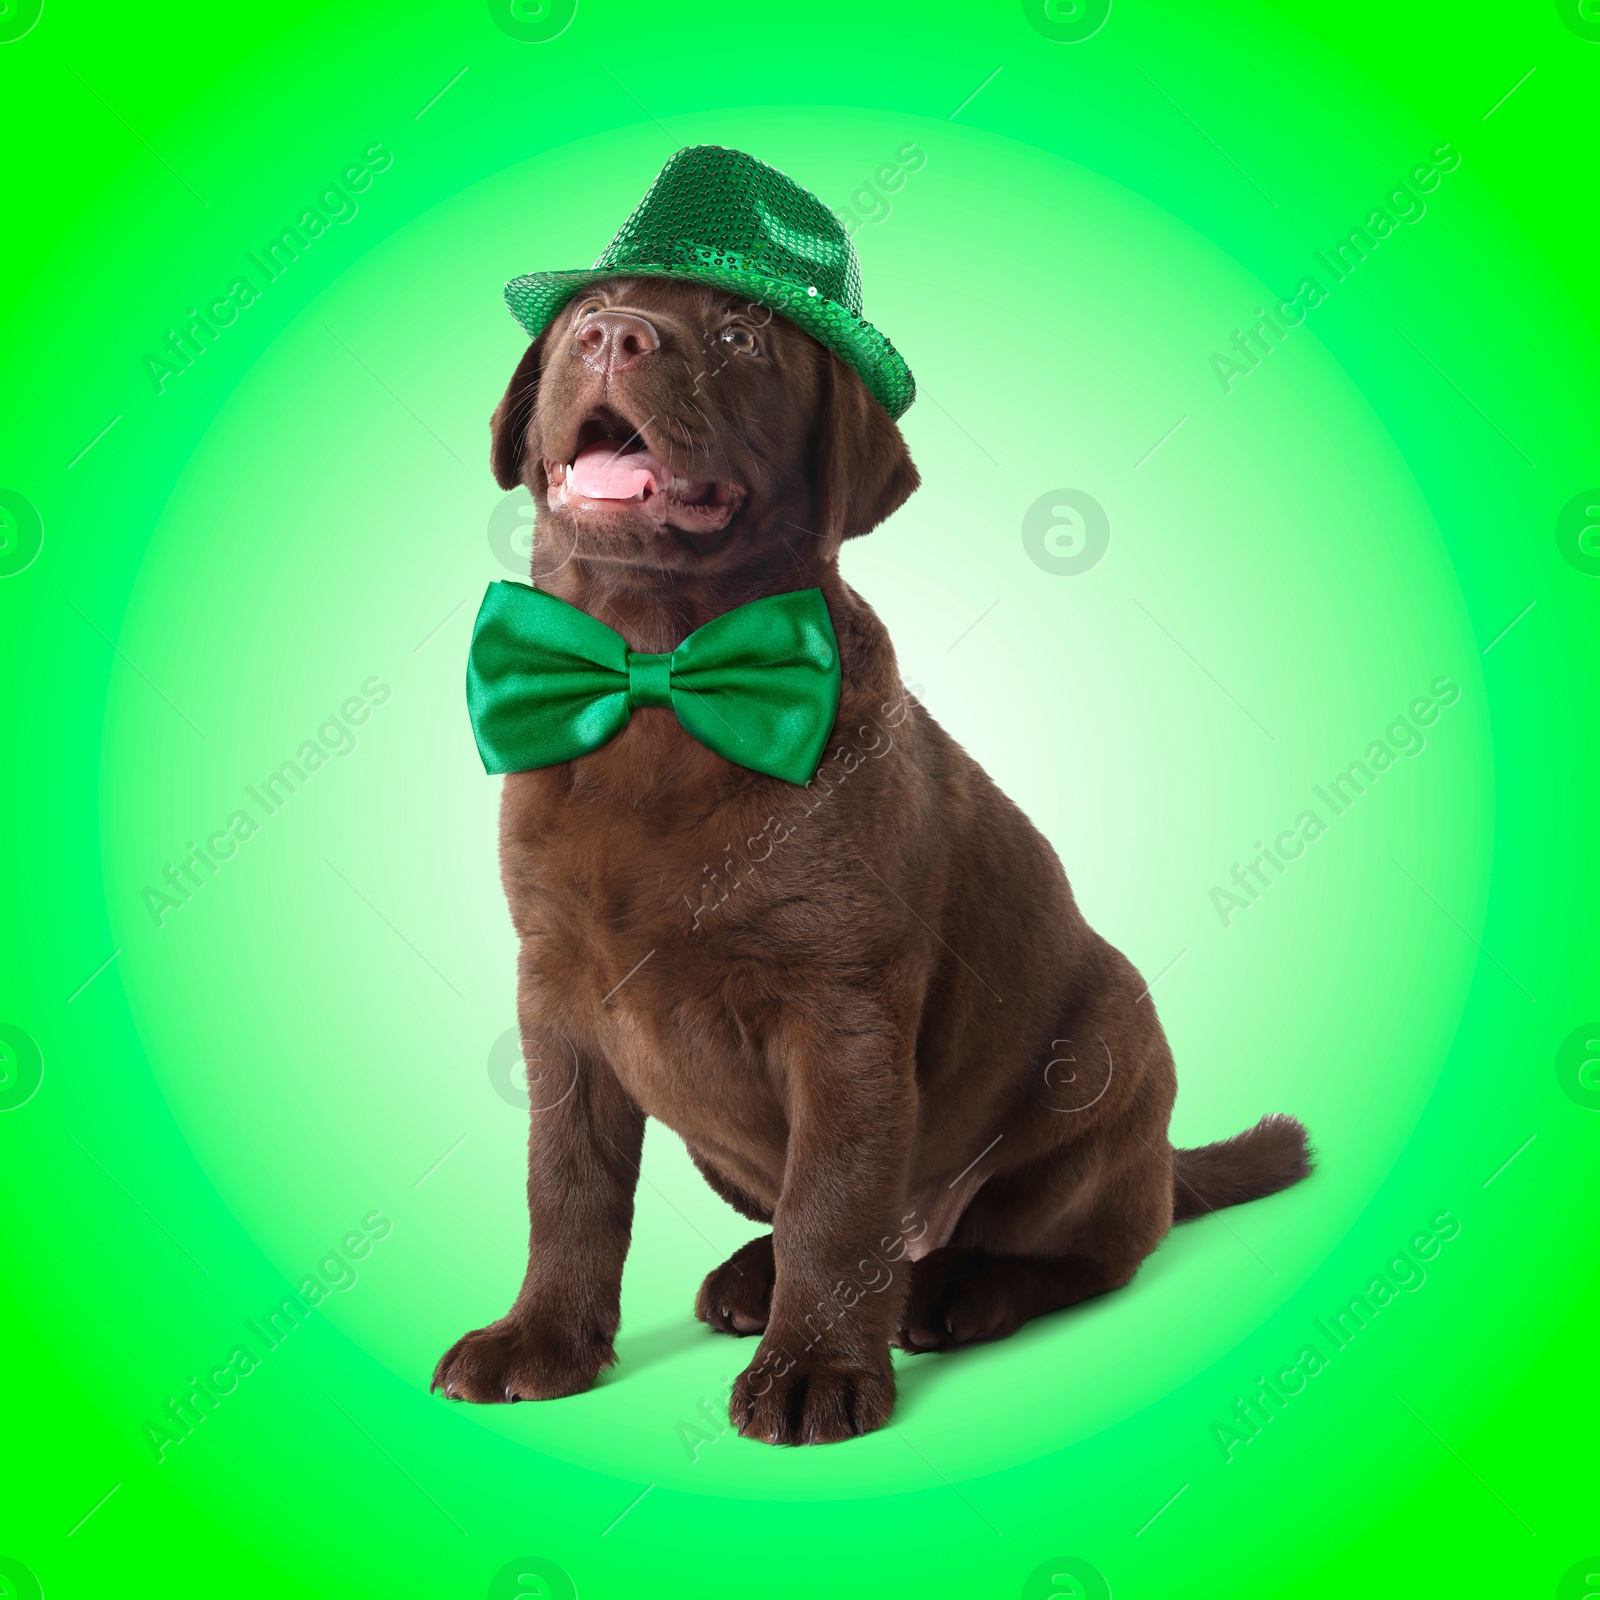 Image of St. Patrick's day celebration. Cute Chocolate Labrador puppy with hat and bow tie on green background